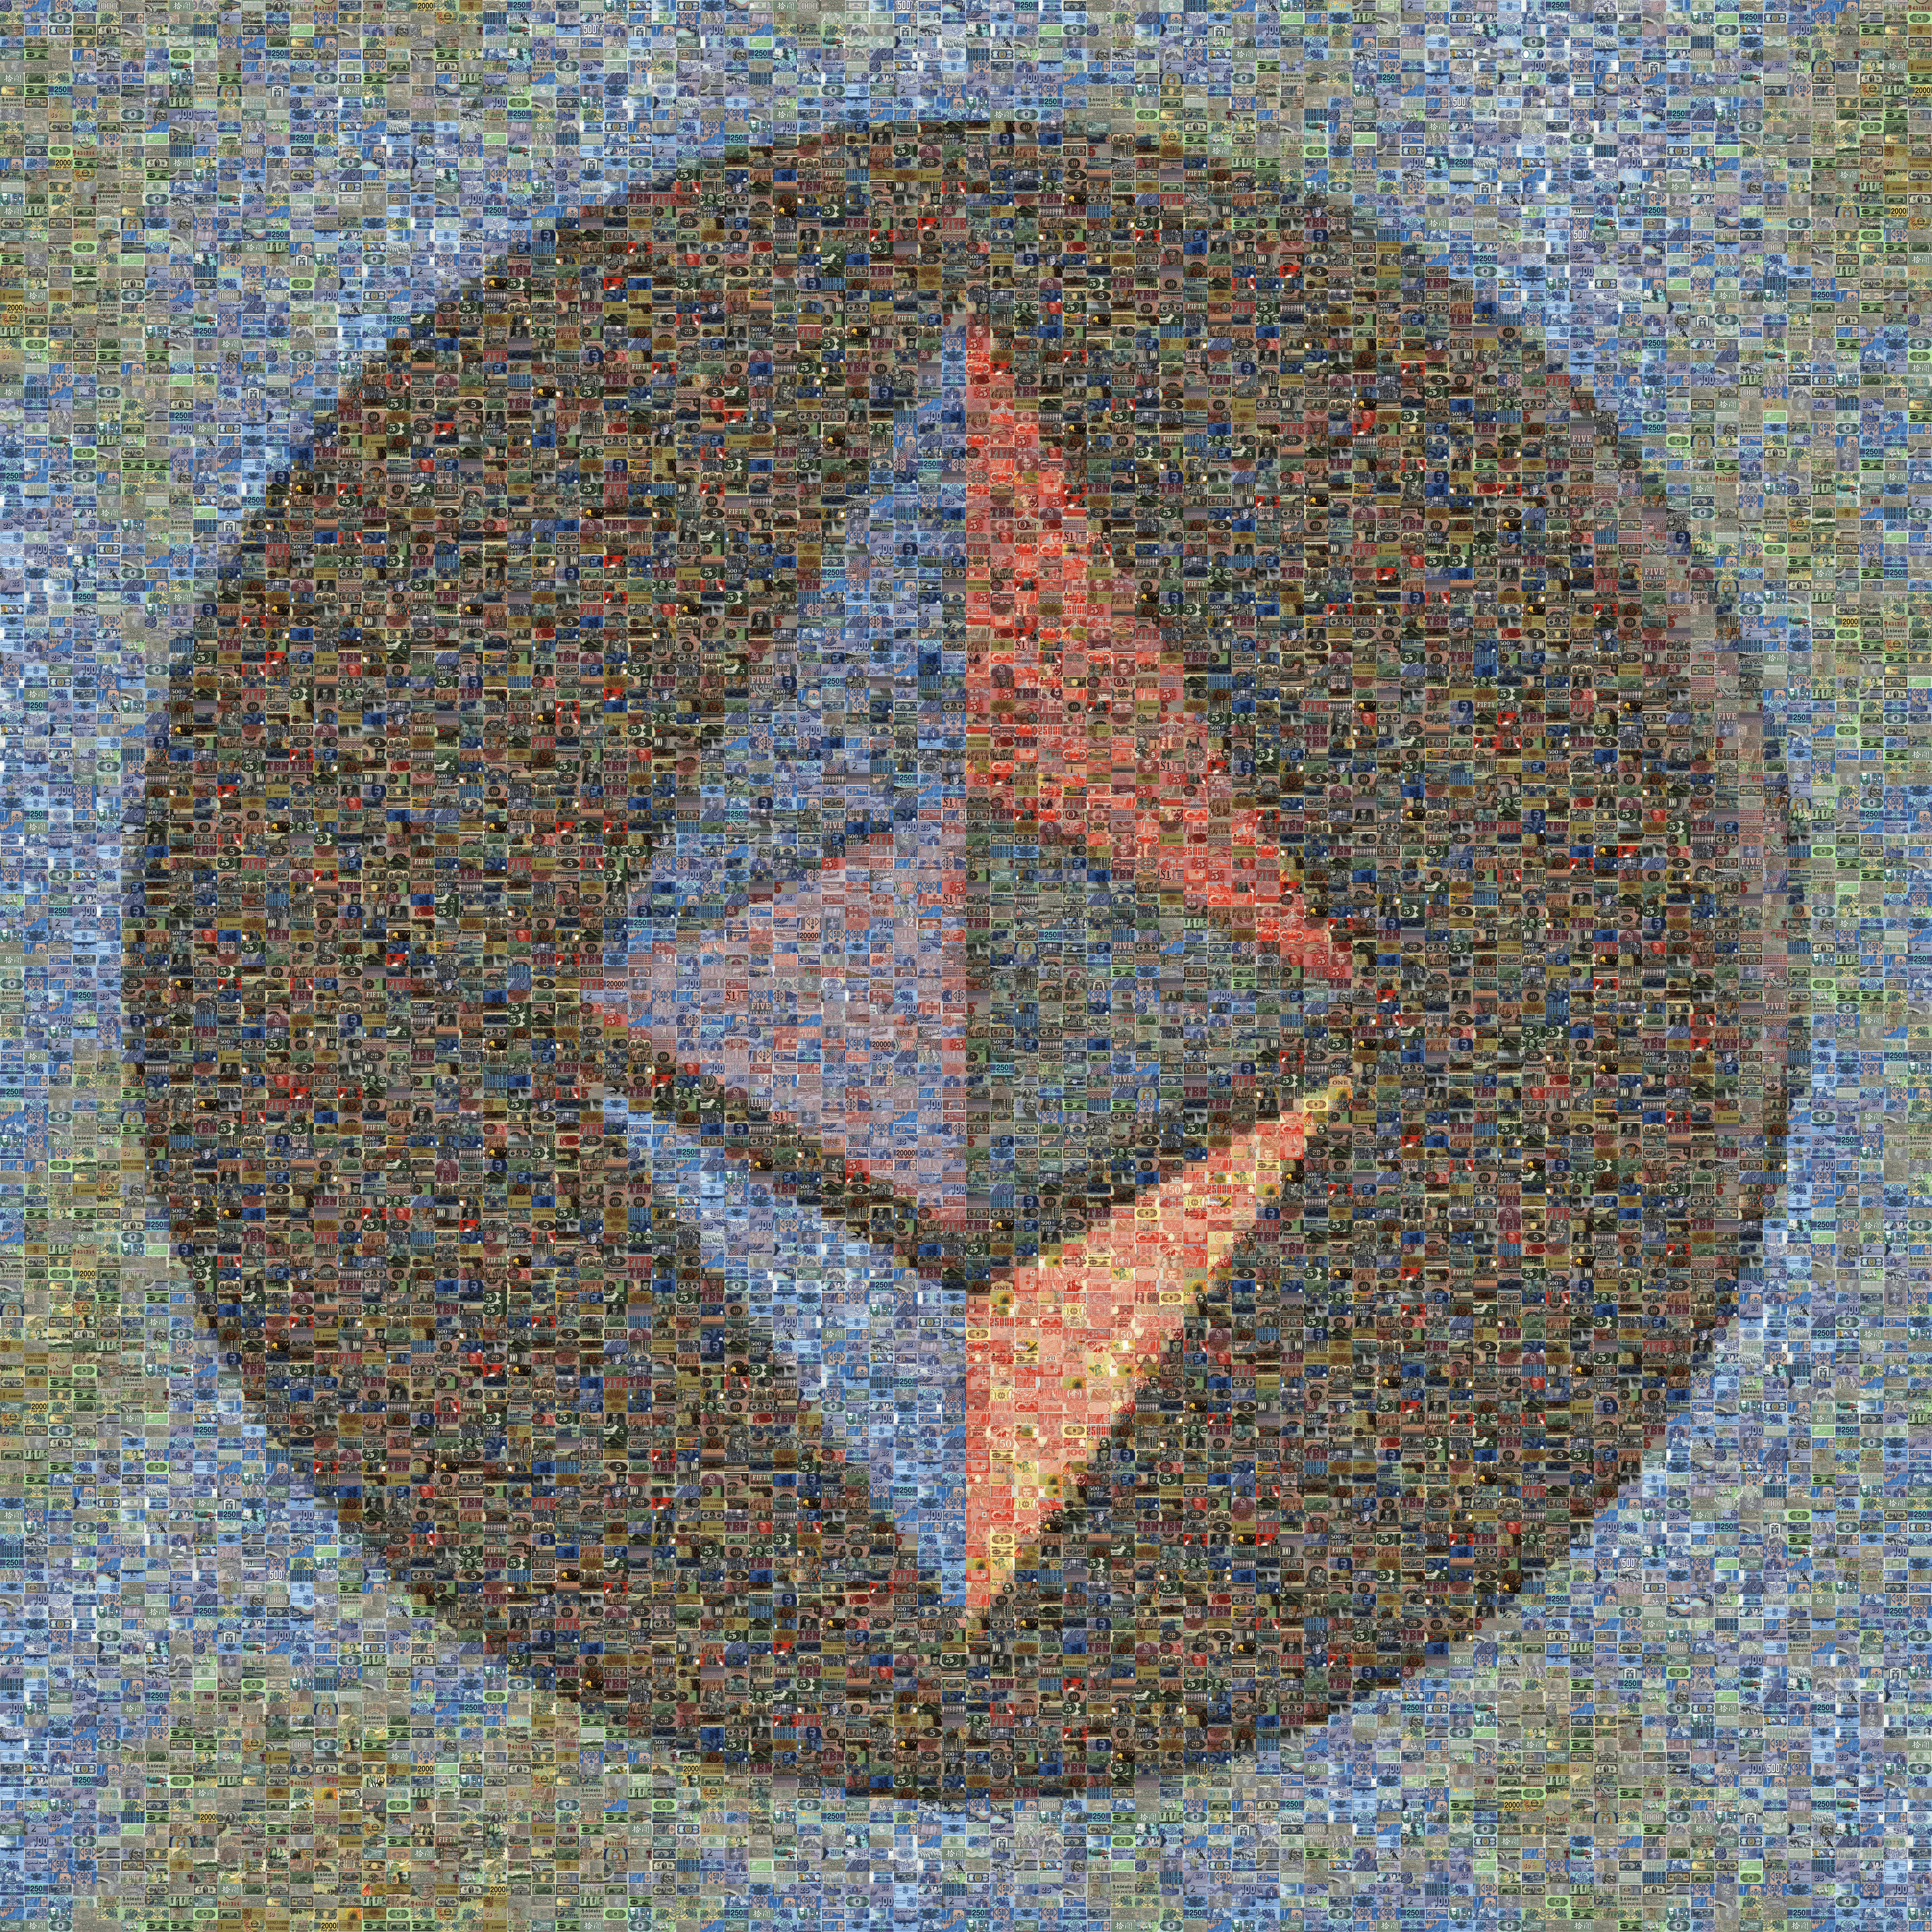 Robert Silvers Original Photomosaic: Ethereum made from Fiat Currency, First Edition of Ten